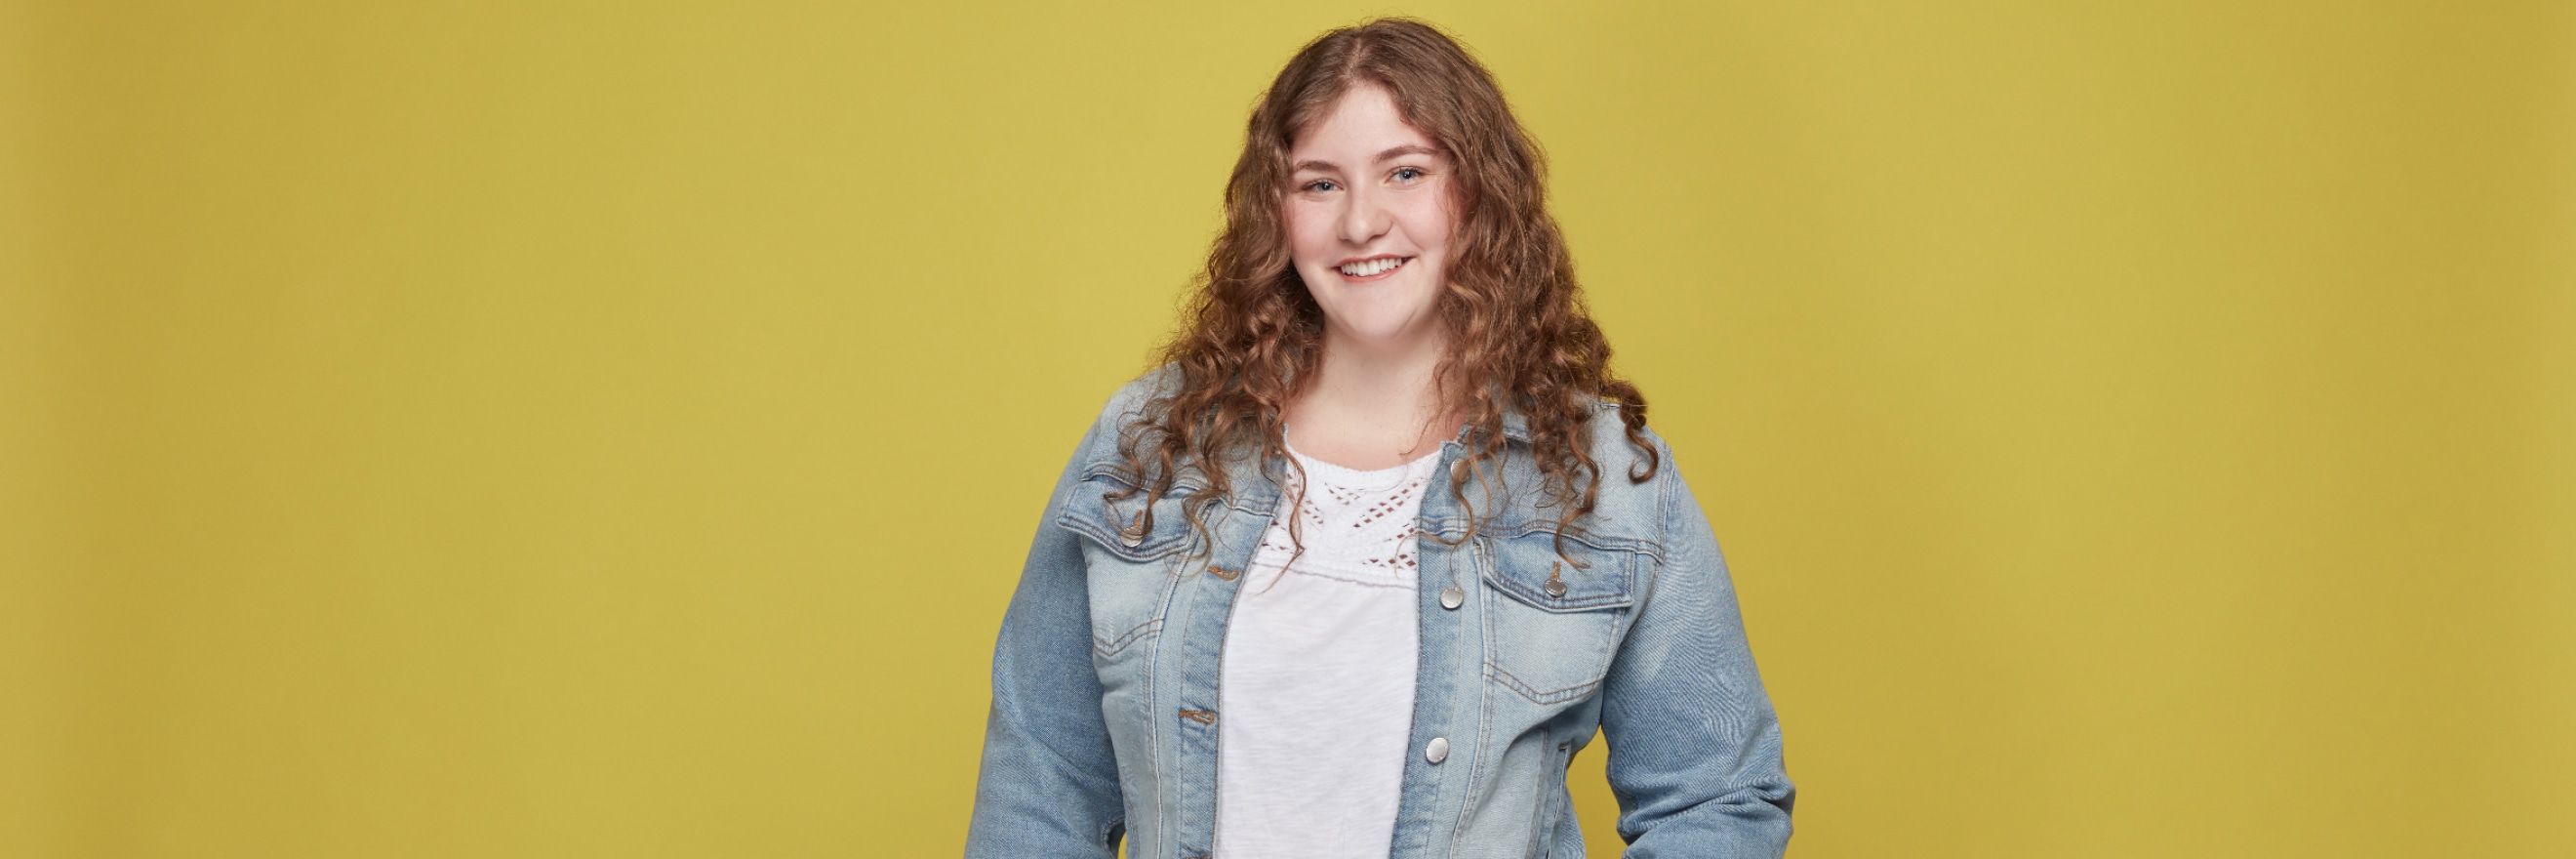 Young women in jean jacket smiling on a yellow background.